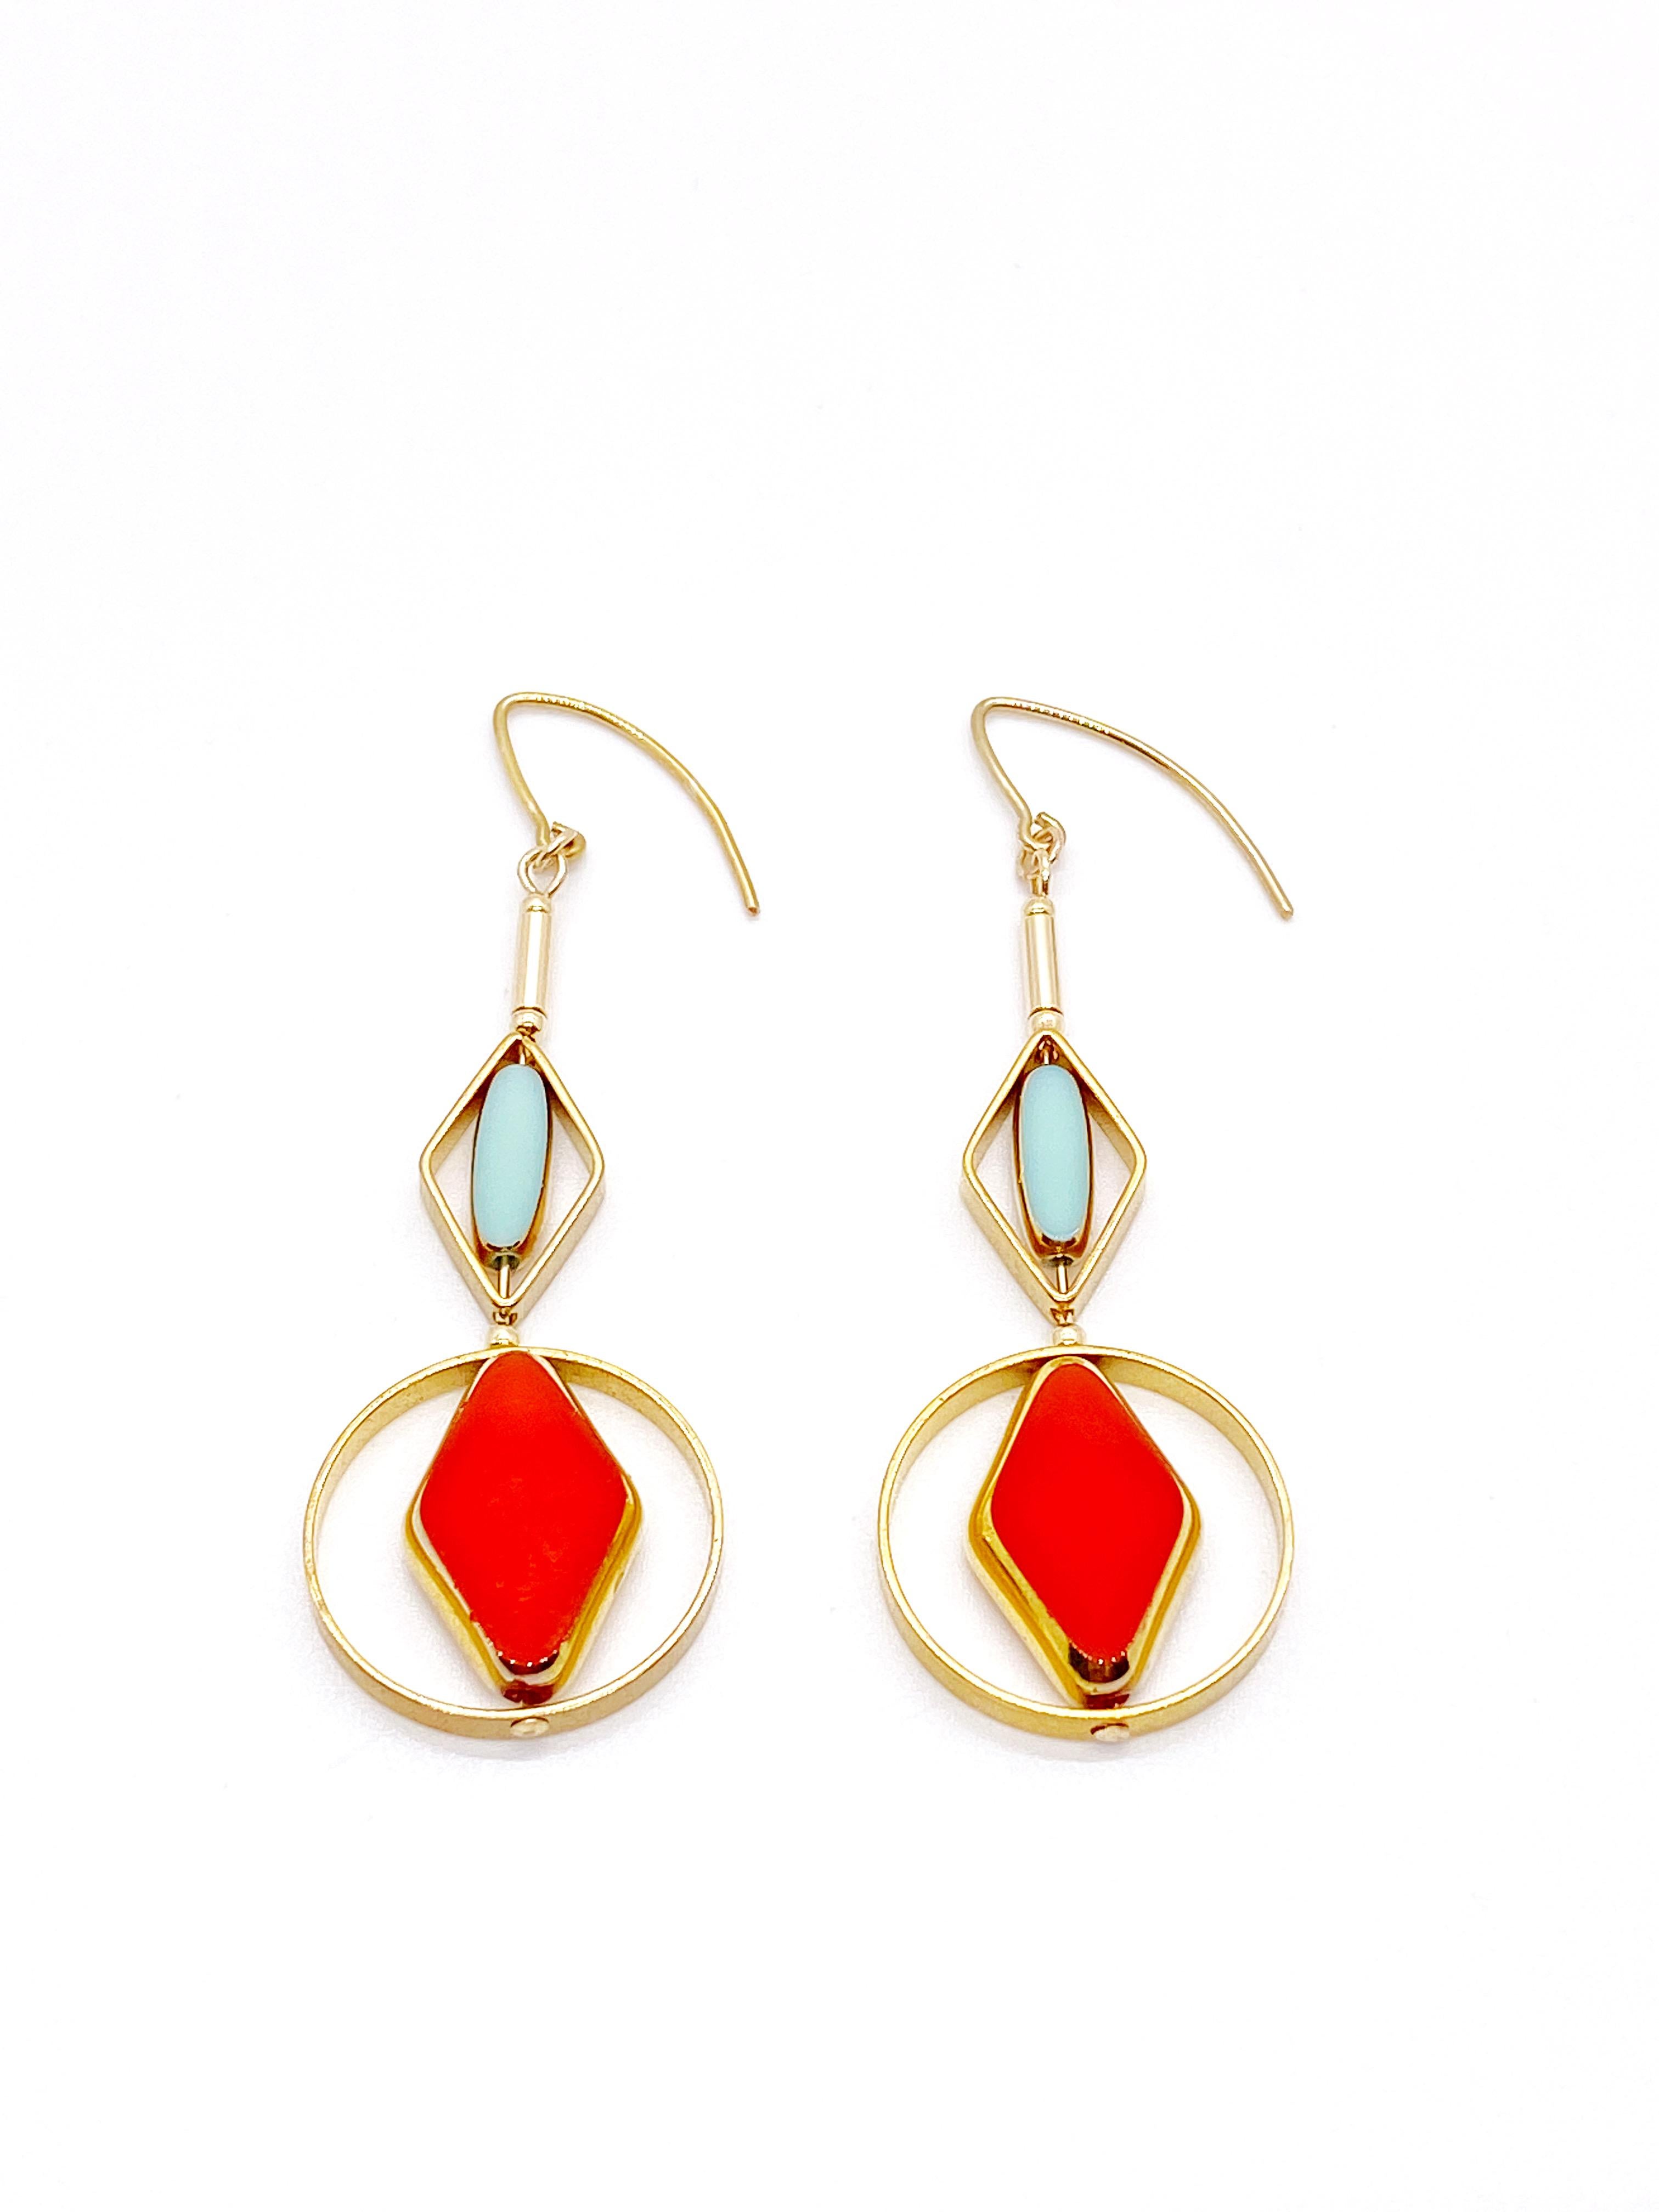 This is for a set of earrings. The earrings consist of orangey red diamond and mini baby blue oblong shaped beads.. They are new old stock vintage German glass beads that are framed with 24K gold. The beads were hand pressed during the 1920s-19760s.